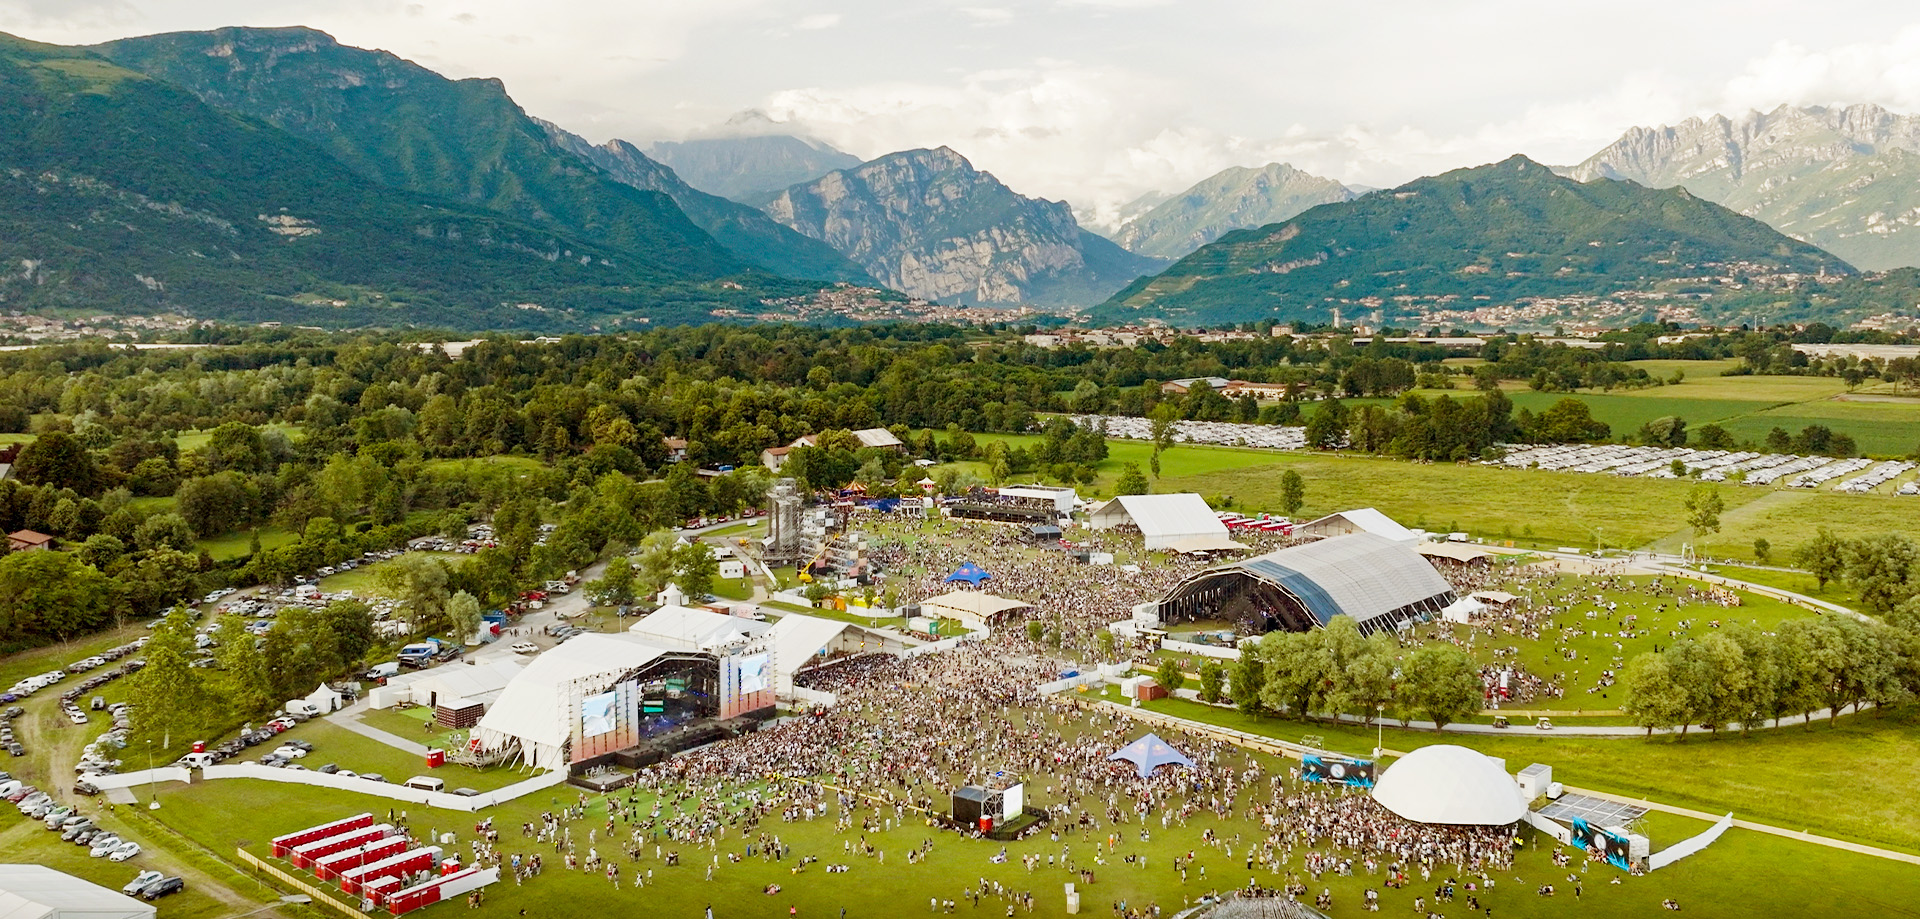 Aereal view of Nameless festival surrounded by the mountains